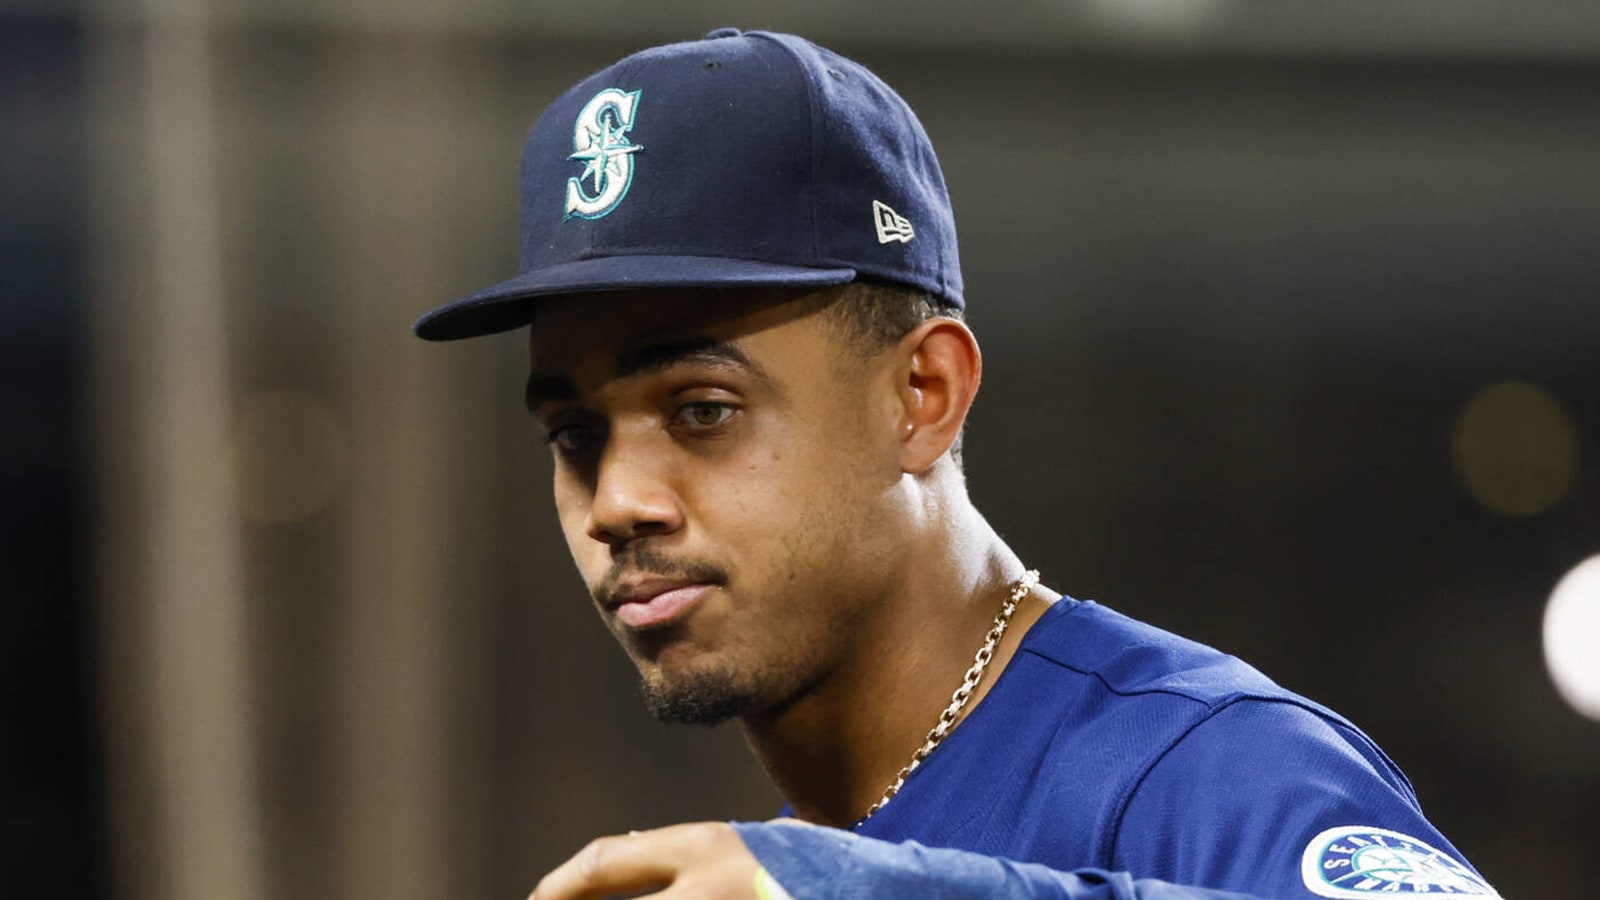 Will extent of Julio Rodriguez's injury alter Mariners' deadline plans?